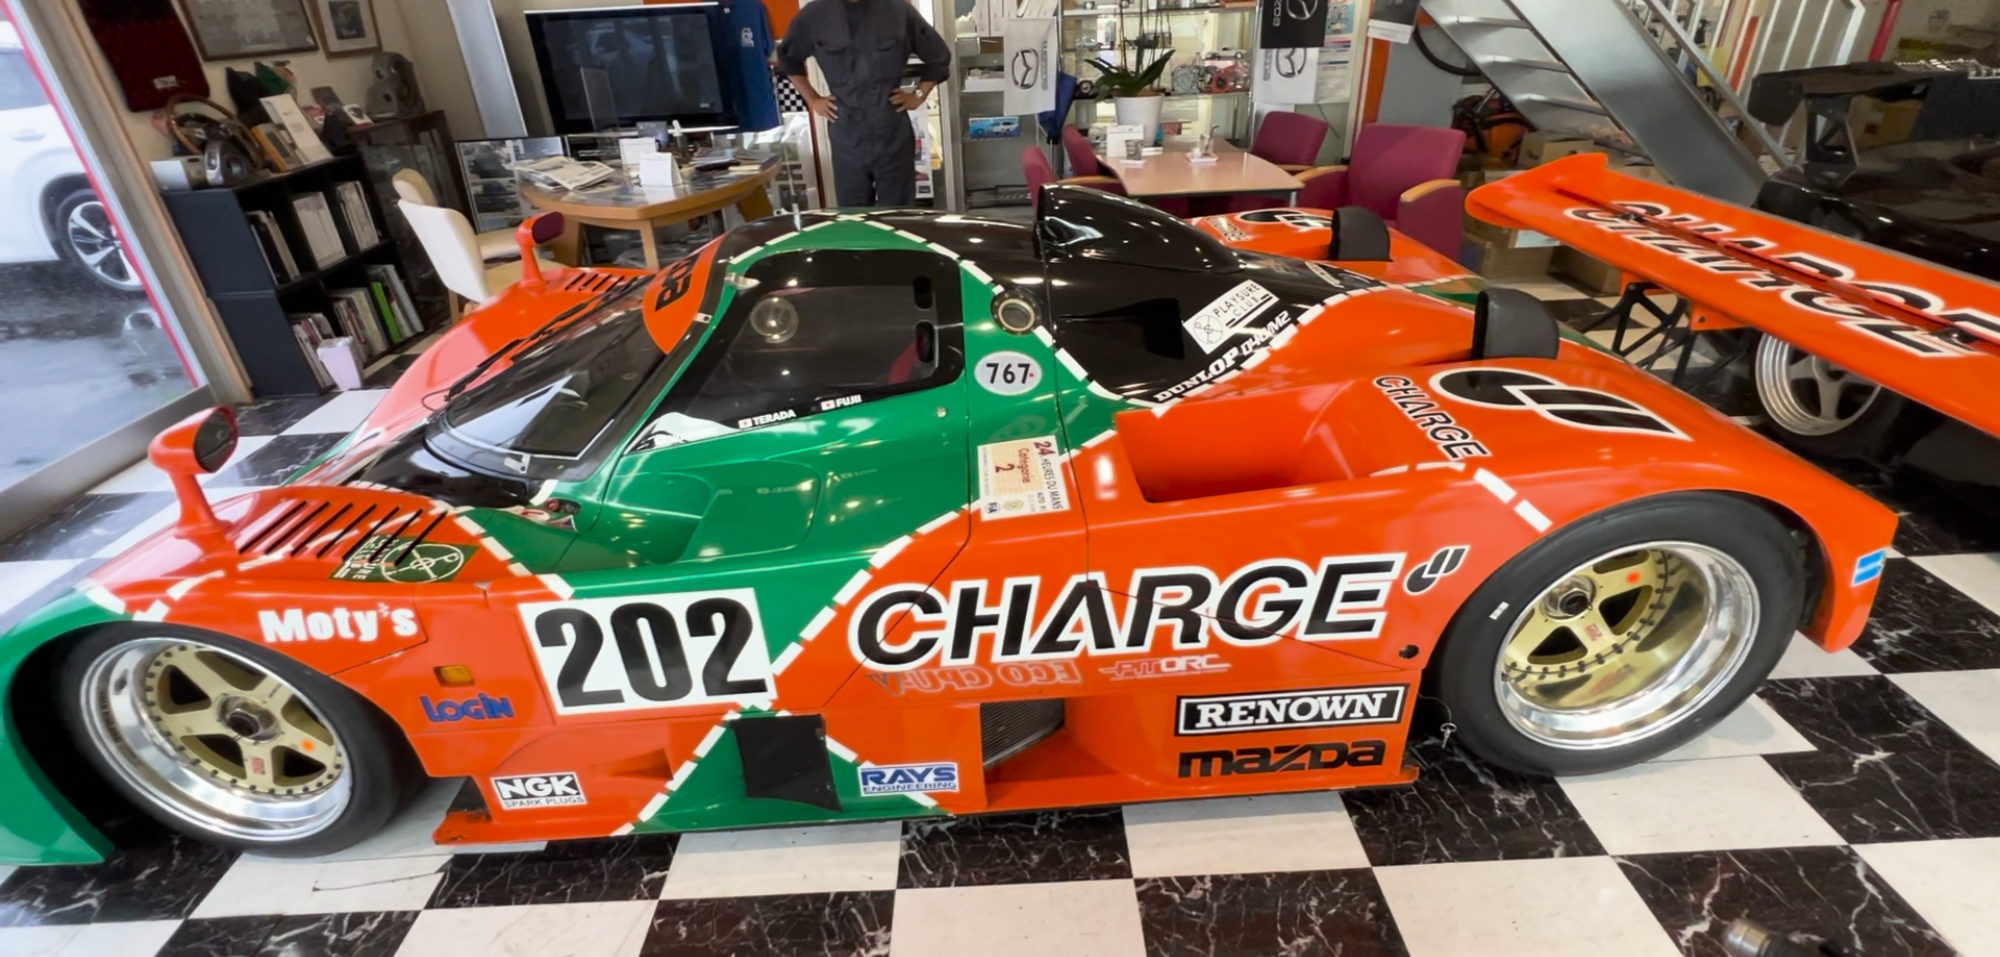 renowned mazda 767b to make amf appearance